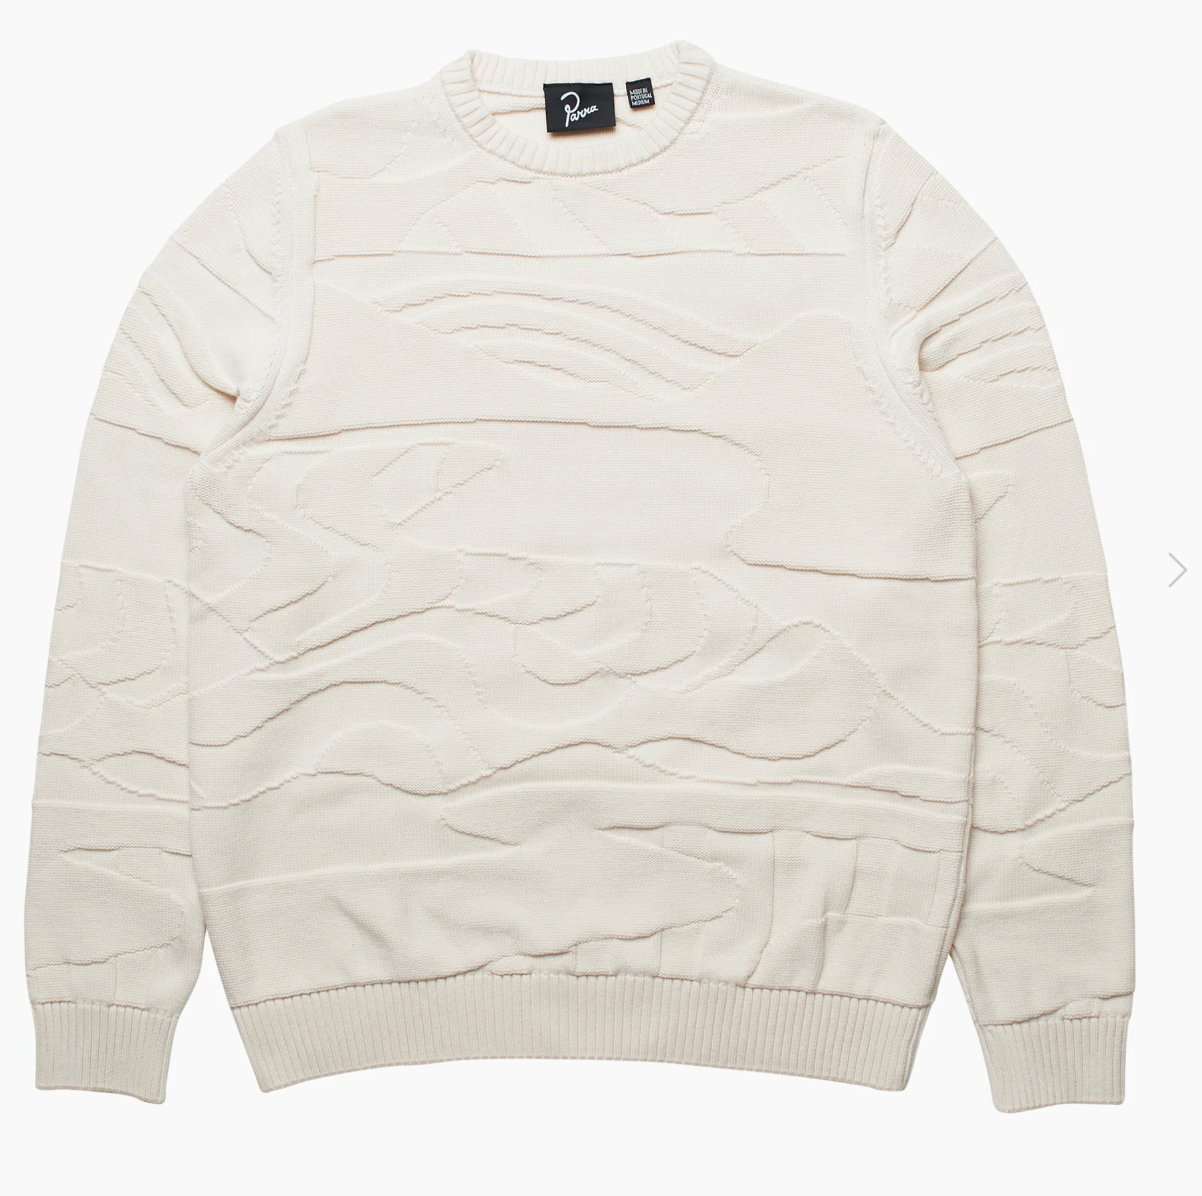 Lanascaped knitted pullover (off white)